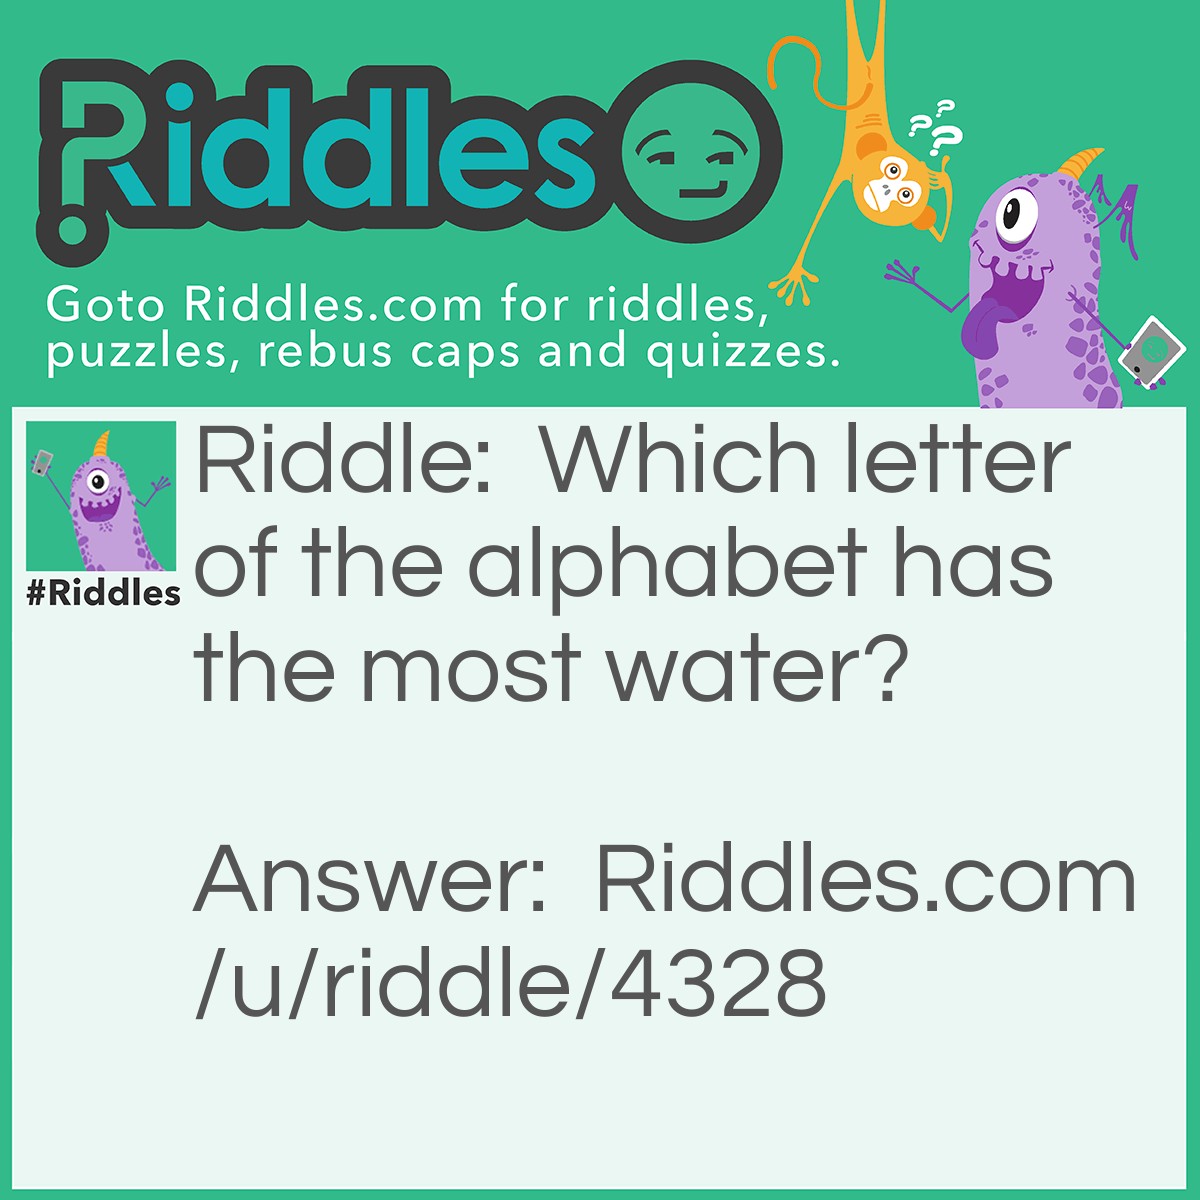 Riddle: Which letter of the alphabet has the most water? Answer: The Letter C.